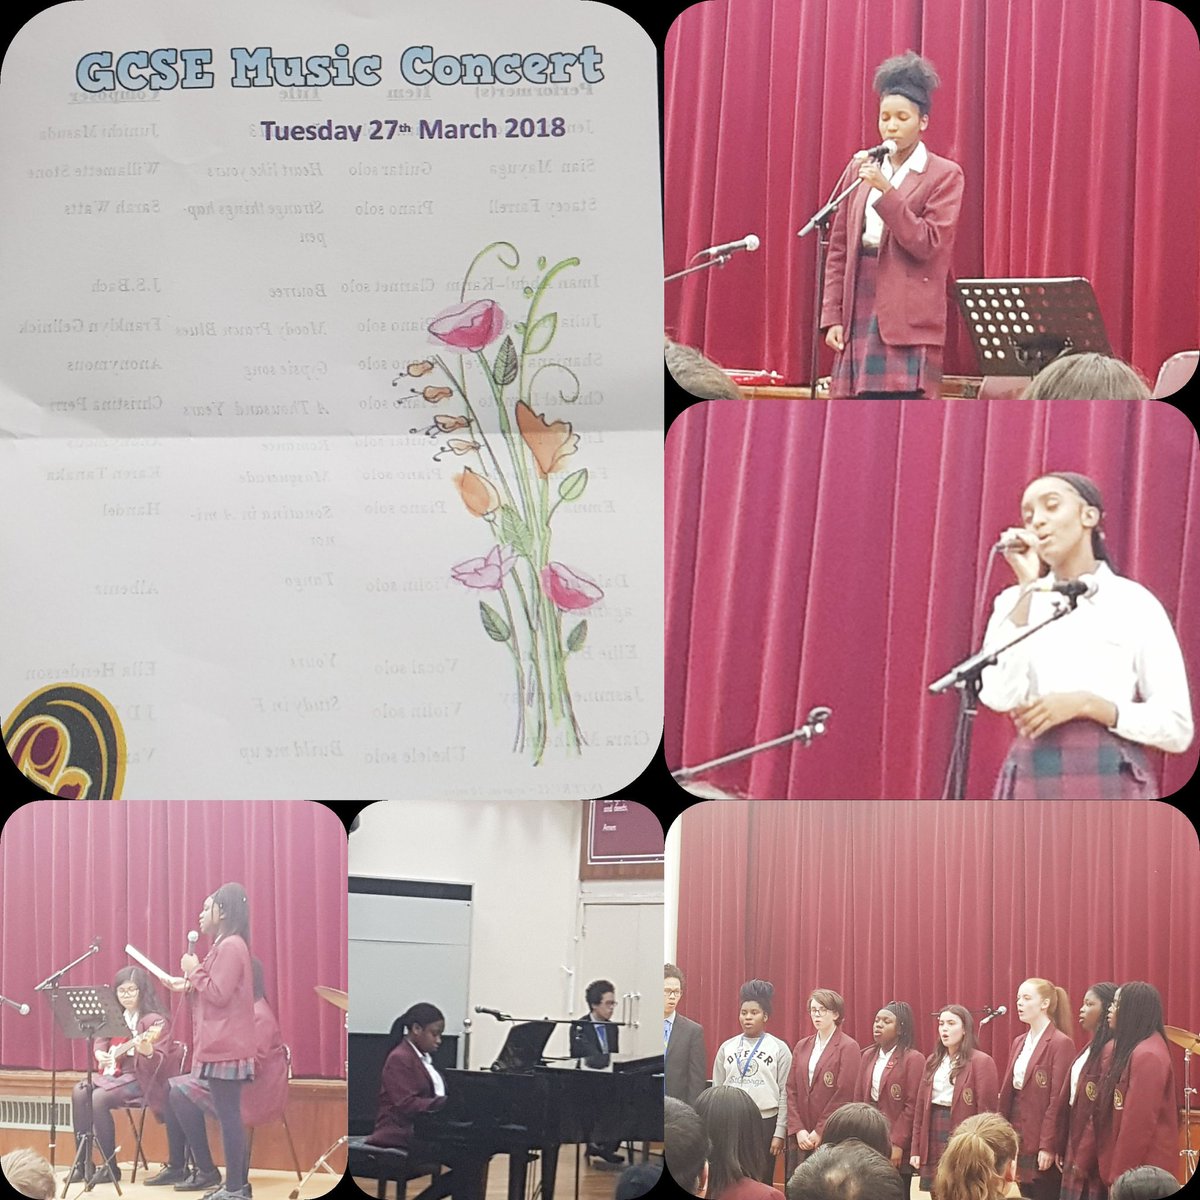 Lovely evening at the @StAnnes_N13 GCSE music concert. What wonderful and talented young ladies. Congratulations @S_Gilling @ClareCowley3 #musicshowcase #amazingladies #proud